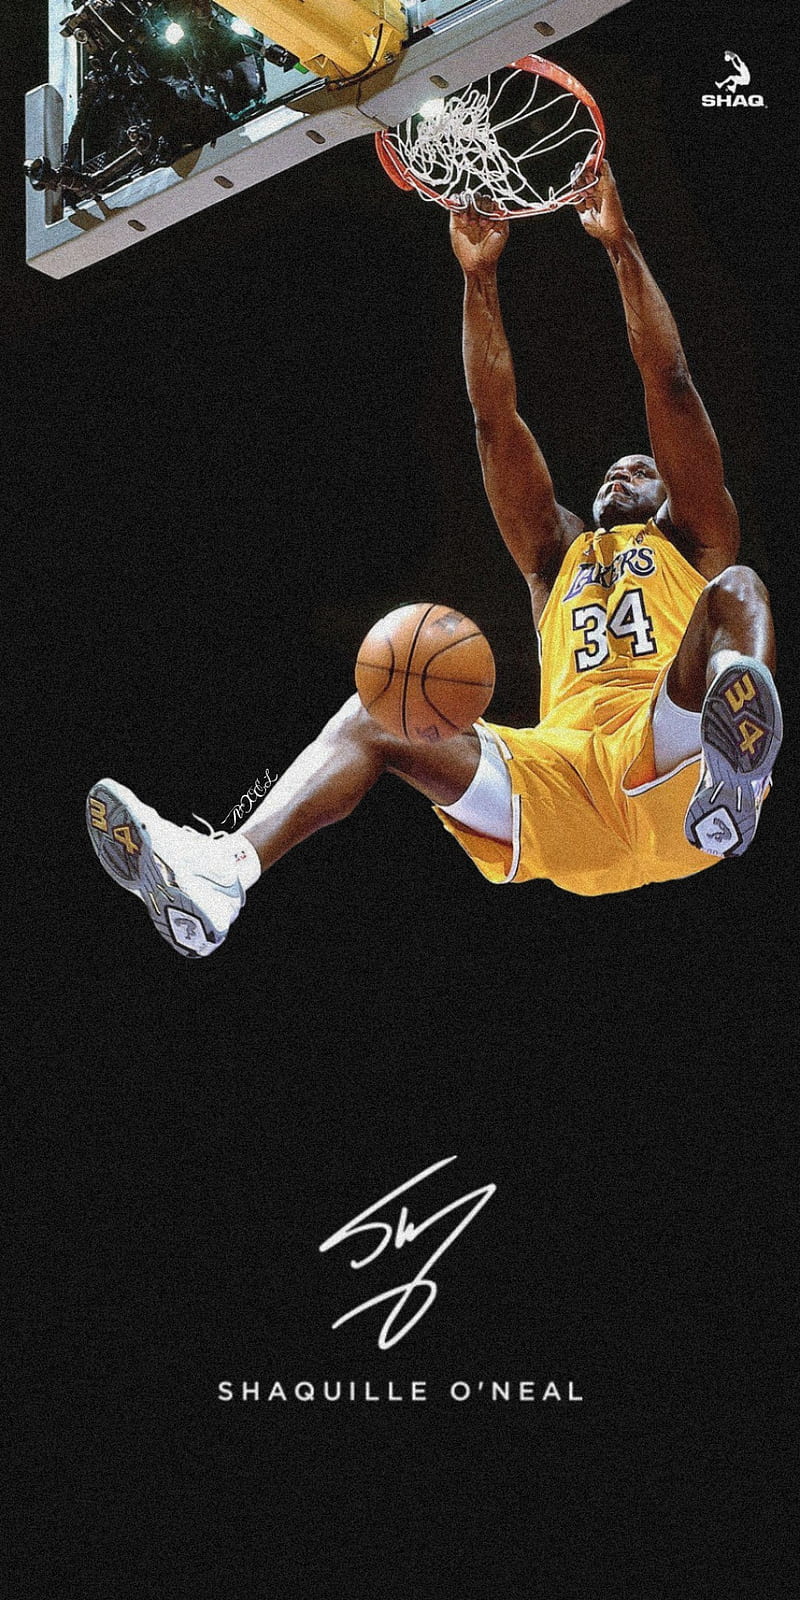 HD wallpaper: Sport, Basketball, Los Angeles, NBA, Lakers, Shaquille O'neal